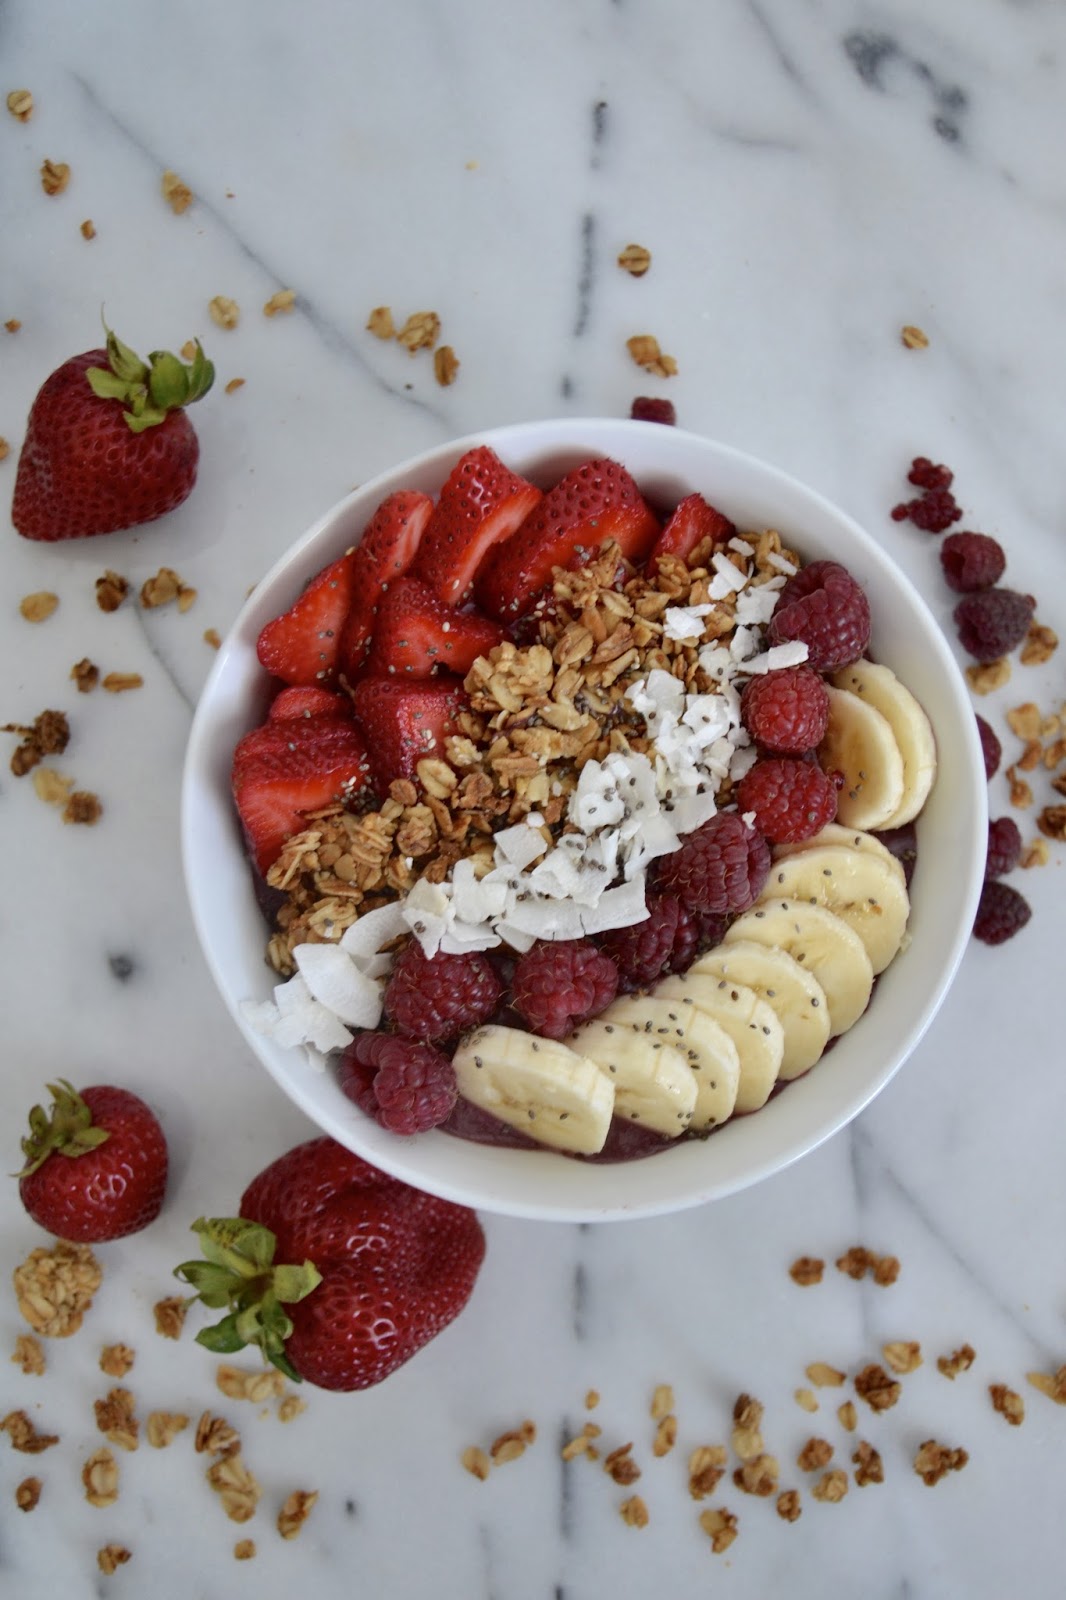 From Foothills to Fog: Acai Bowls